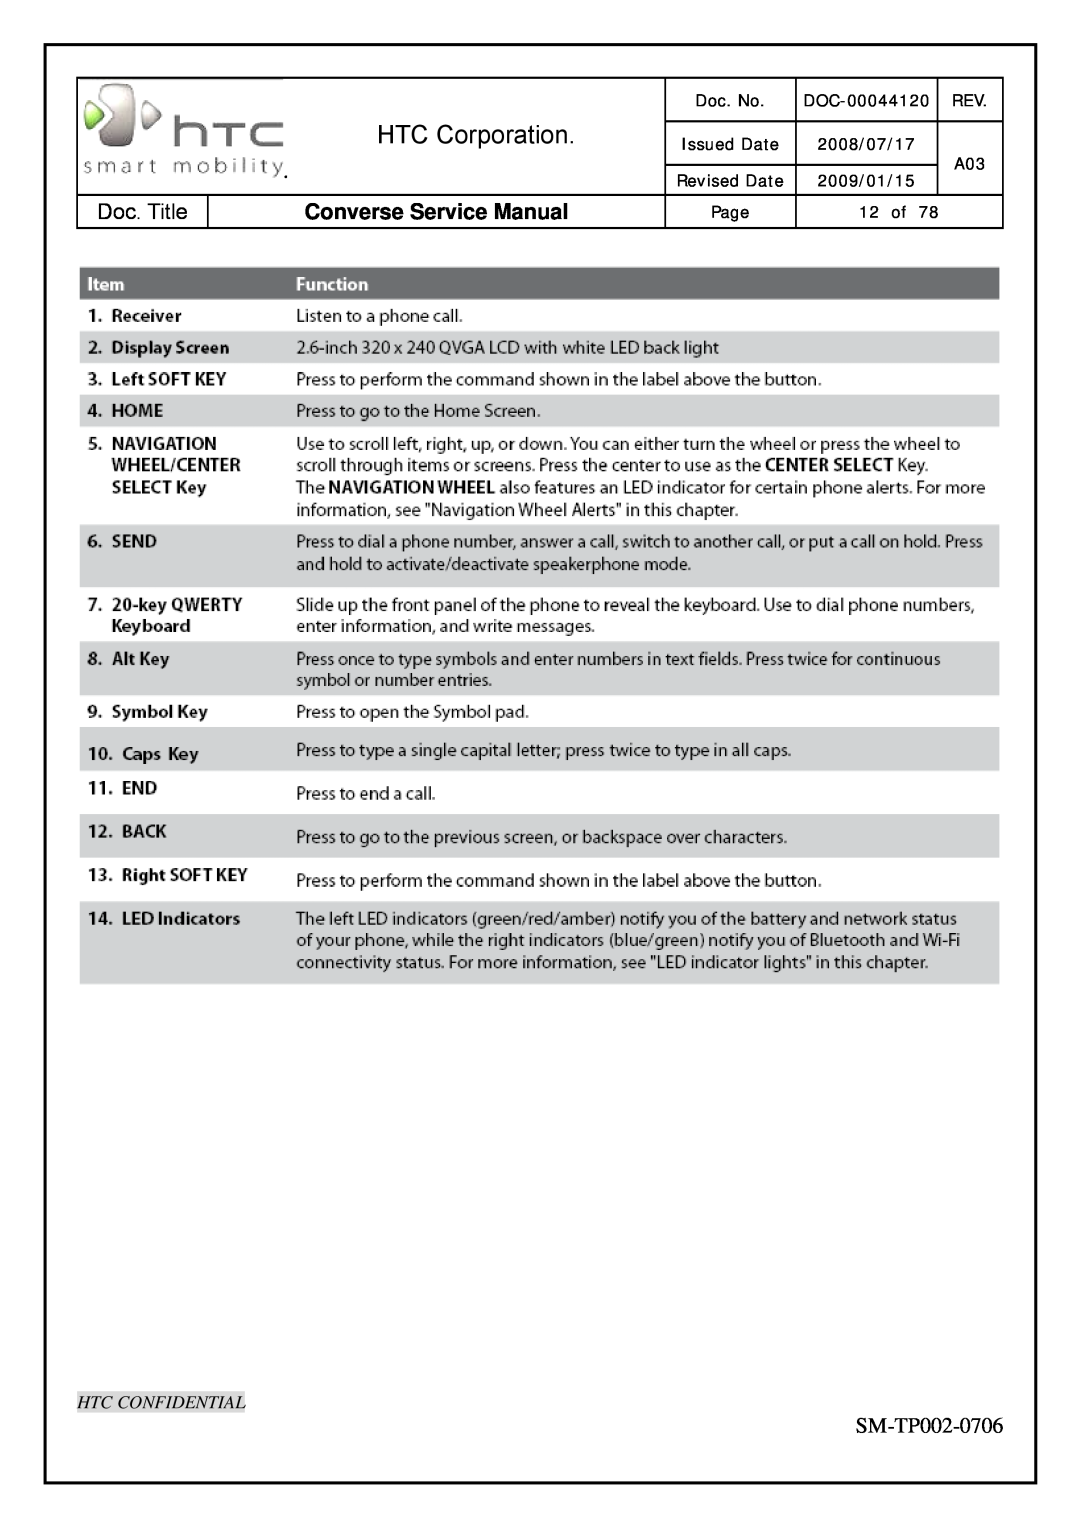 HTC SM-TP002-0706 HTC Corporation, Converse Service Manual, Htc Confidential, Doc. No, DOC-00044120, 12 of, Issued Date 